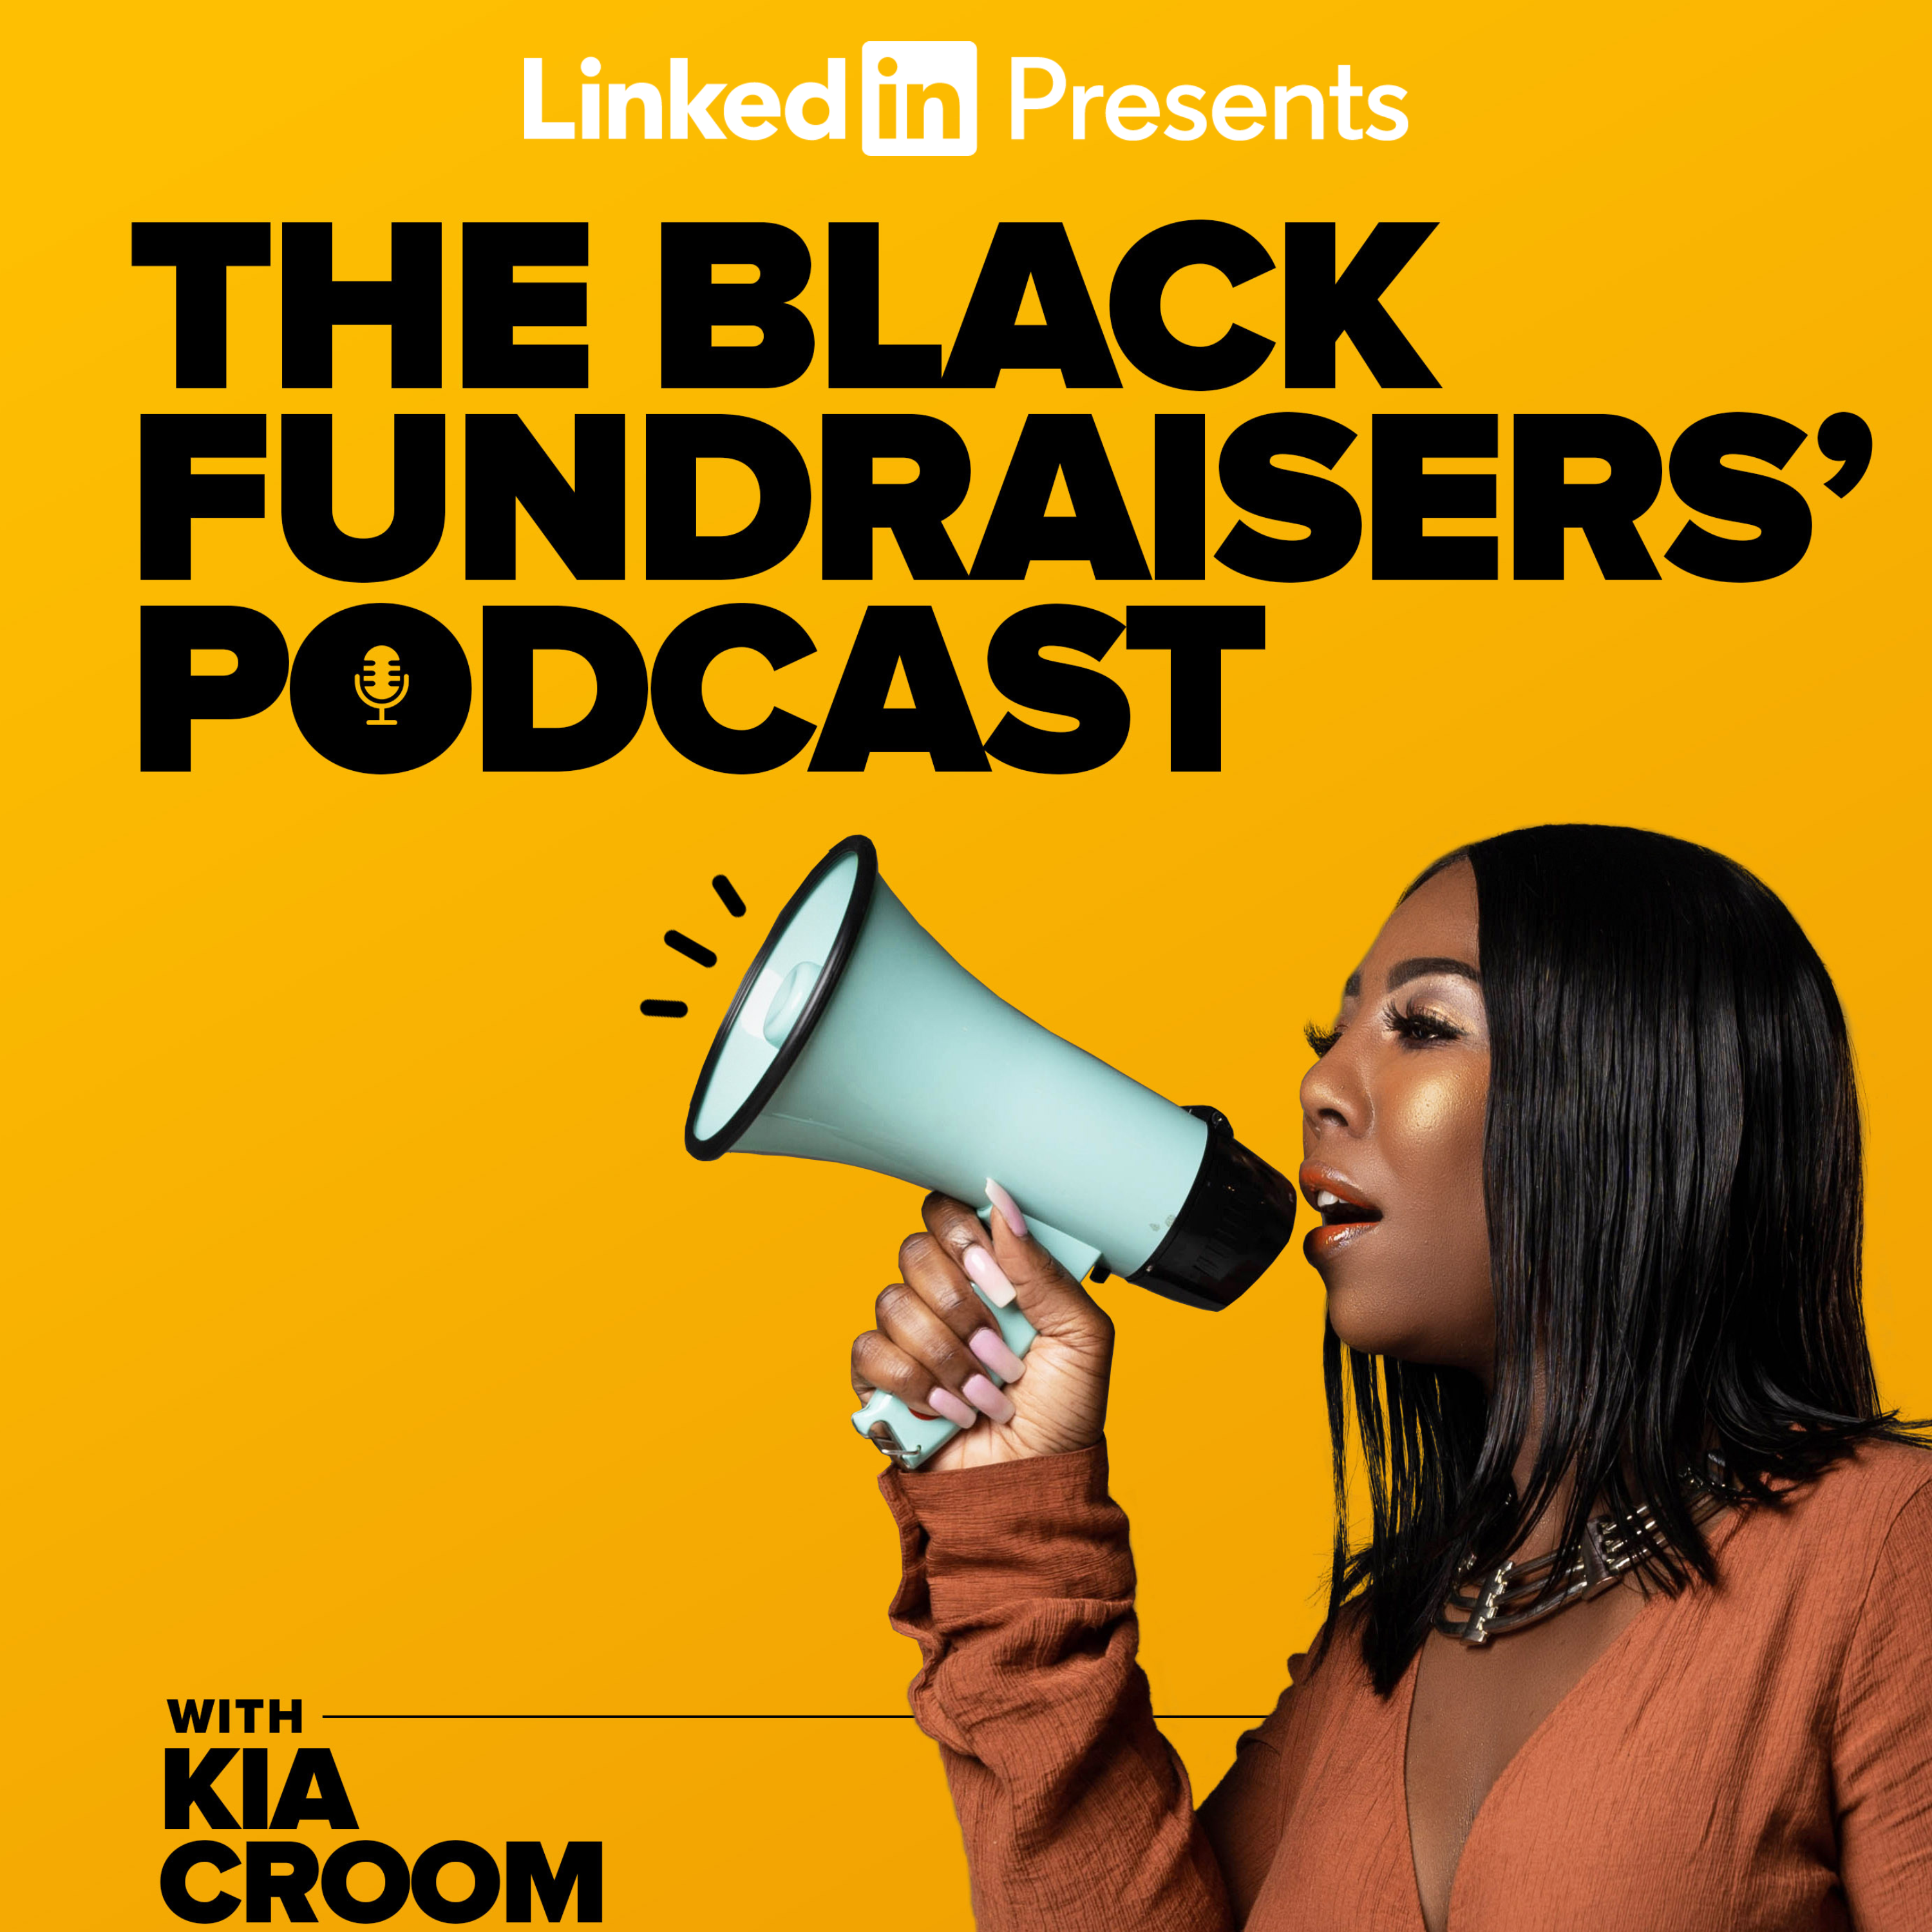 The Black Fundraisers' Podcast